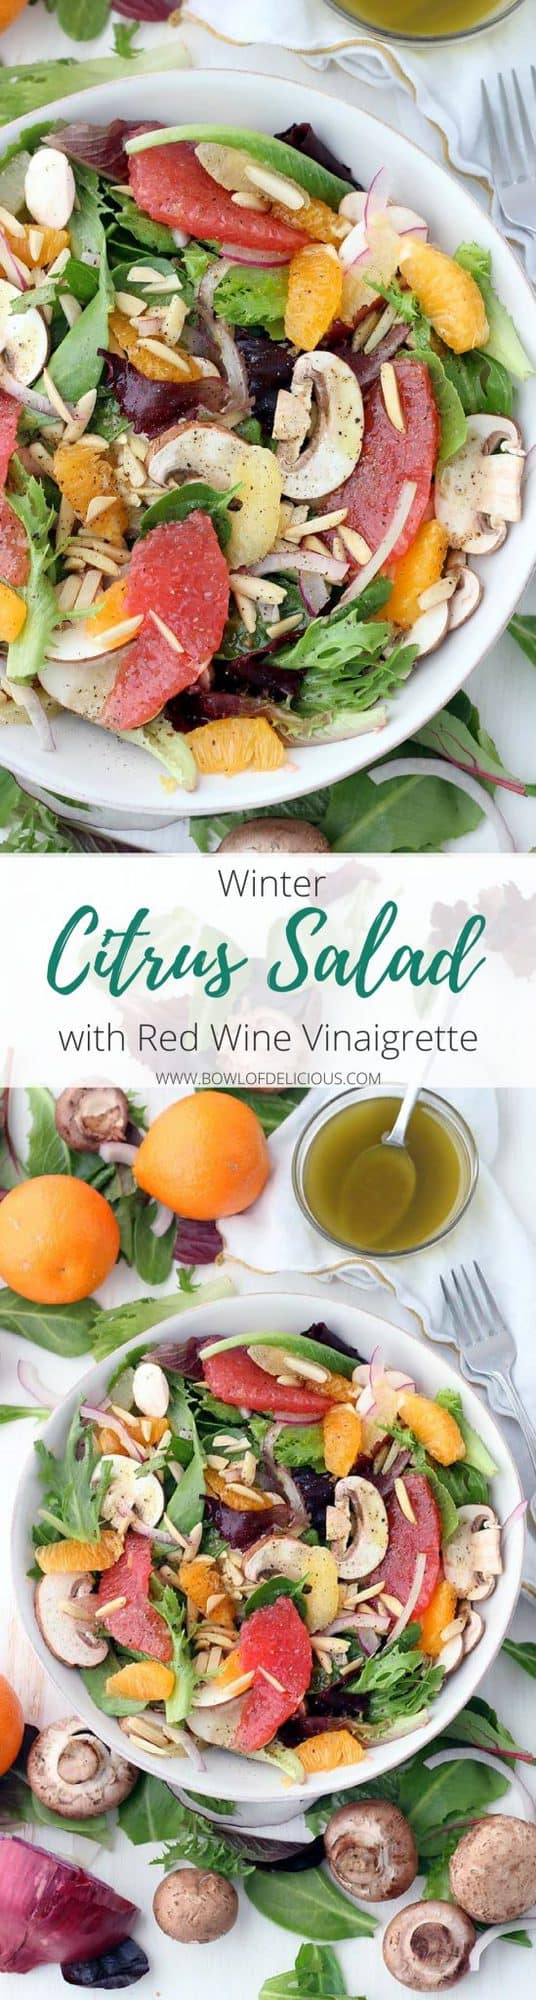 This delicious Winter Citrus Salad with Red Wine Vinaigrette is packed with seasonal Mandarin oranges and grapefruit. It's tossed with thinly sliced mushrooms, toasted almonds, and a versatile red wine vinaigrette, and is a great recipe for meal prepping! #Citrus #SaladRecipes #WinterRecipes #SeasonalRecipes #VeganRecipes